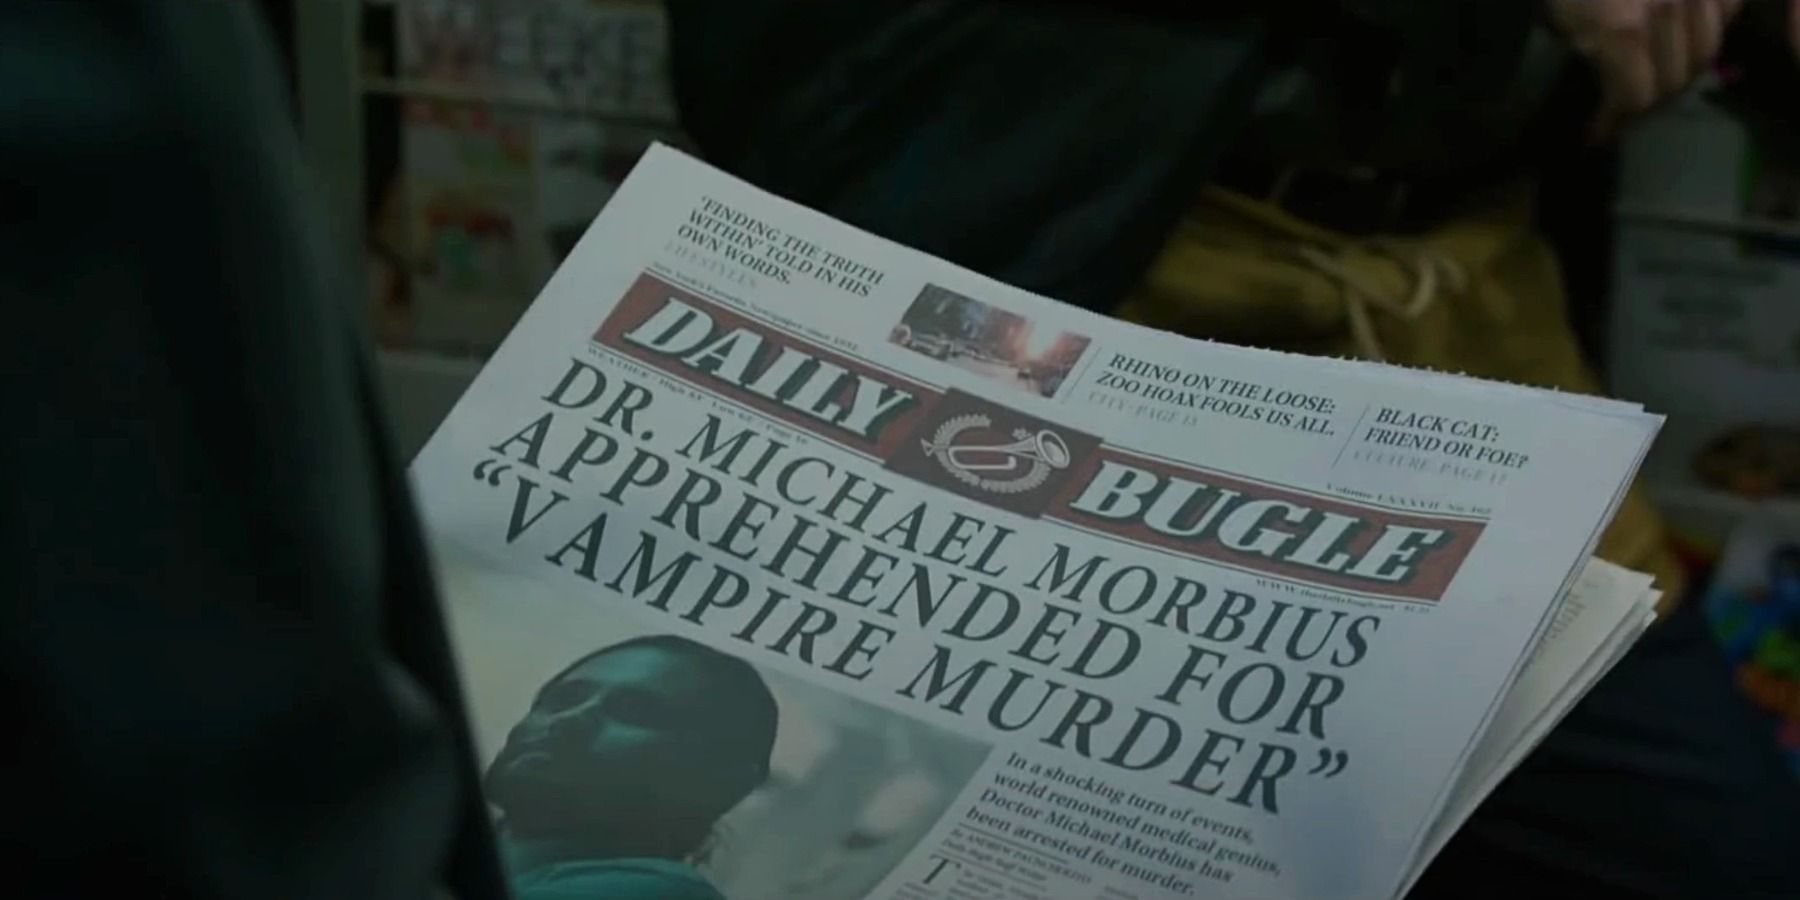 The Daily Bugle in Morbius easter eggs